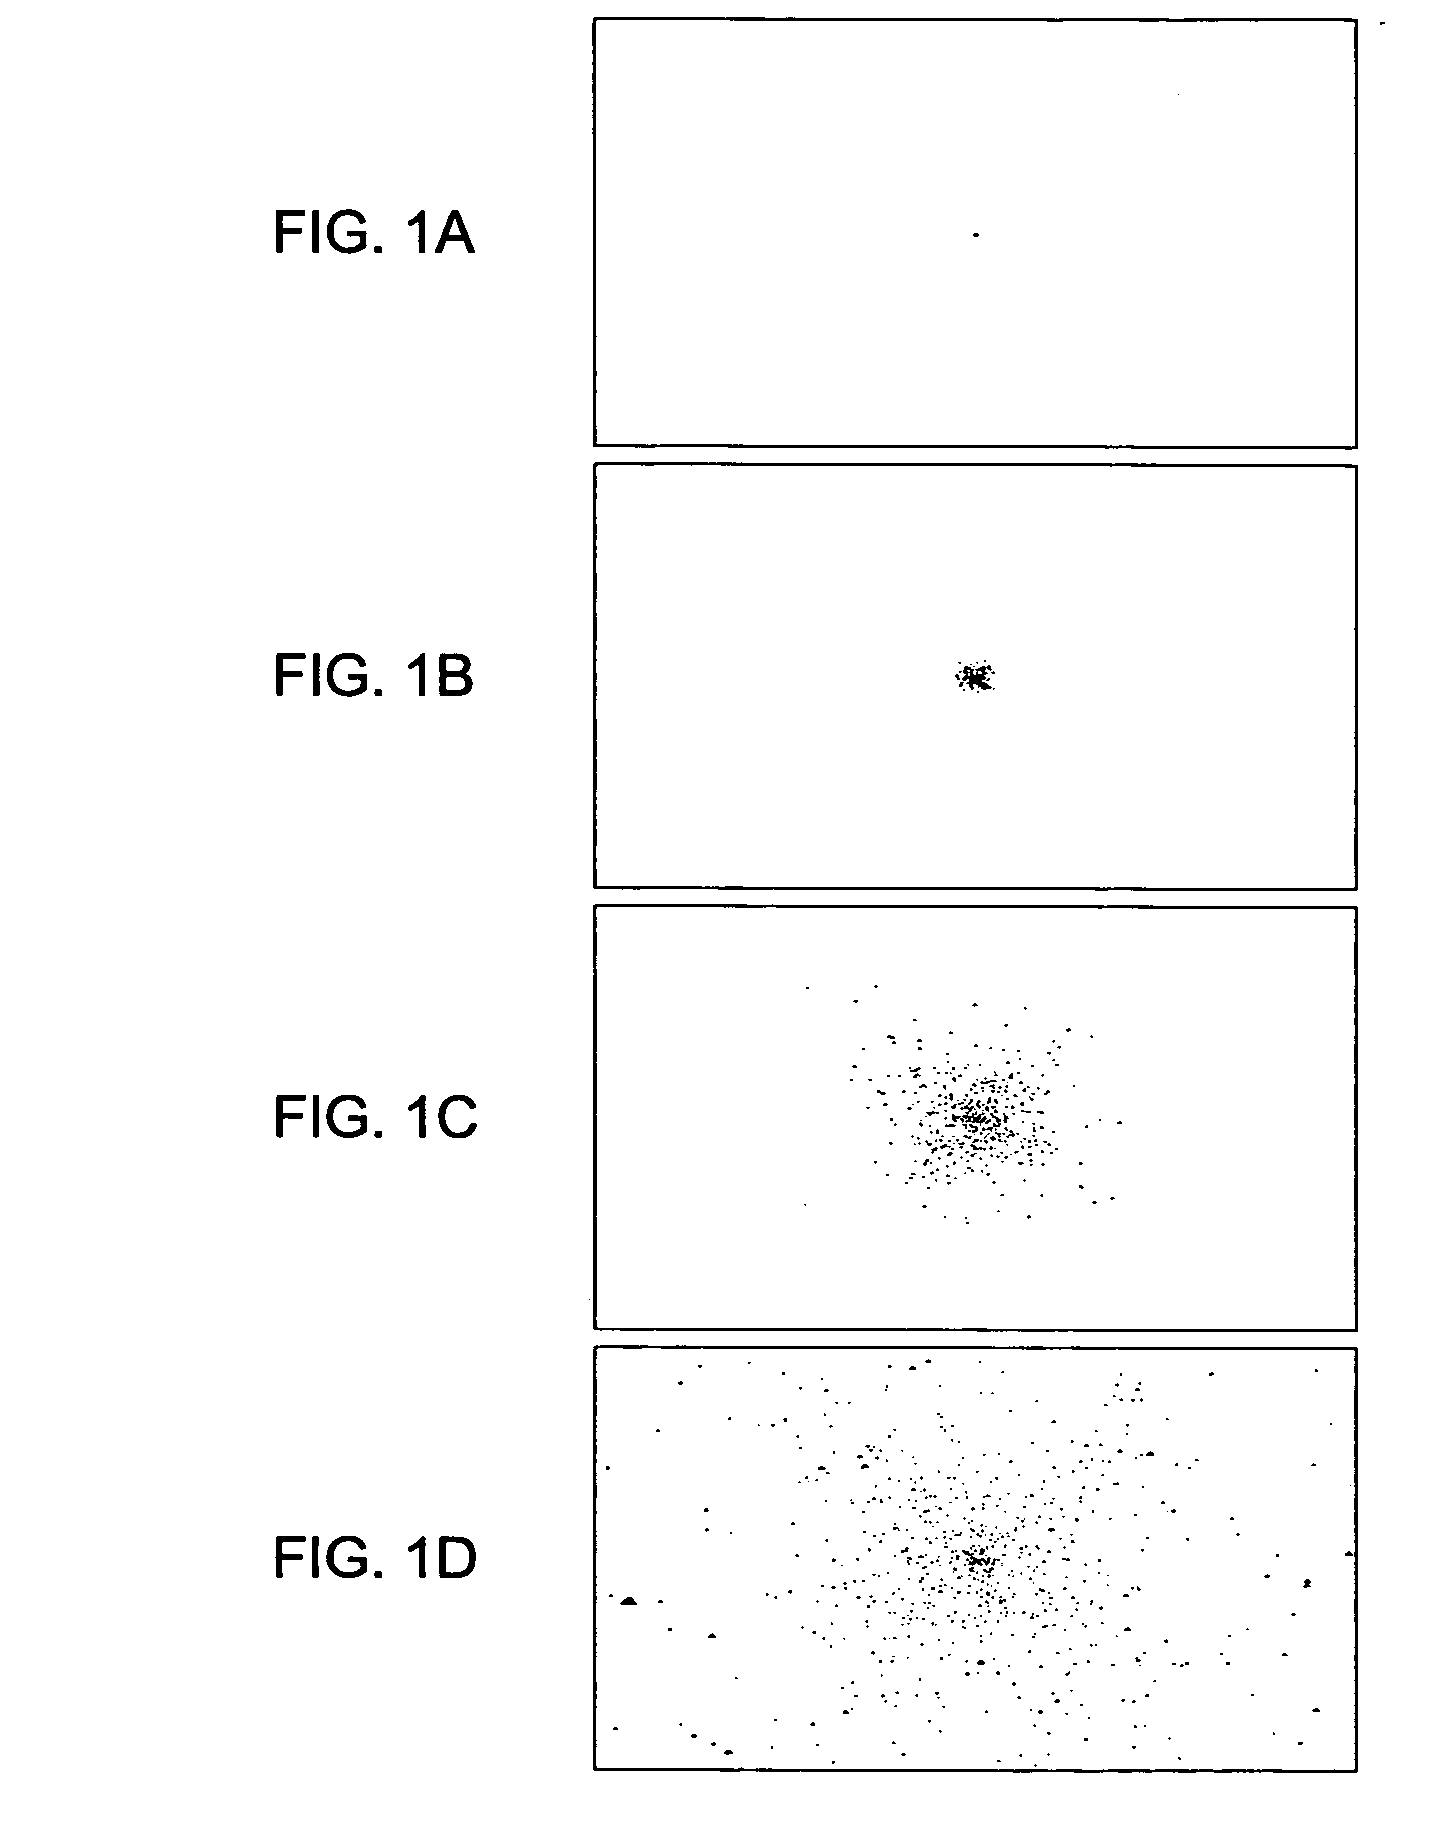 Configurable particle system representation for biofeedback applications